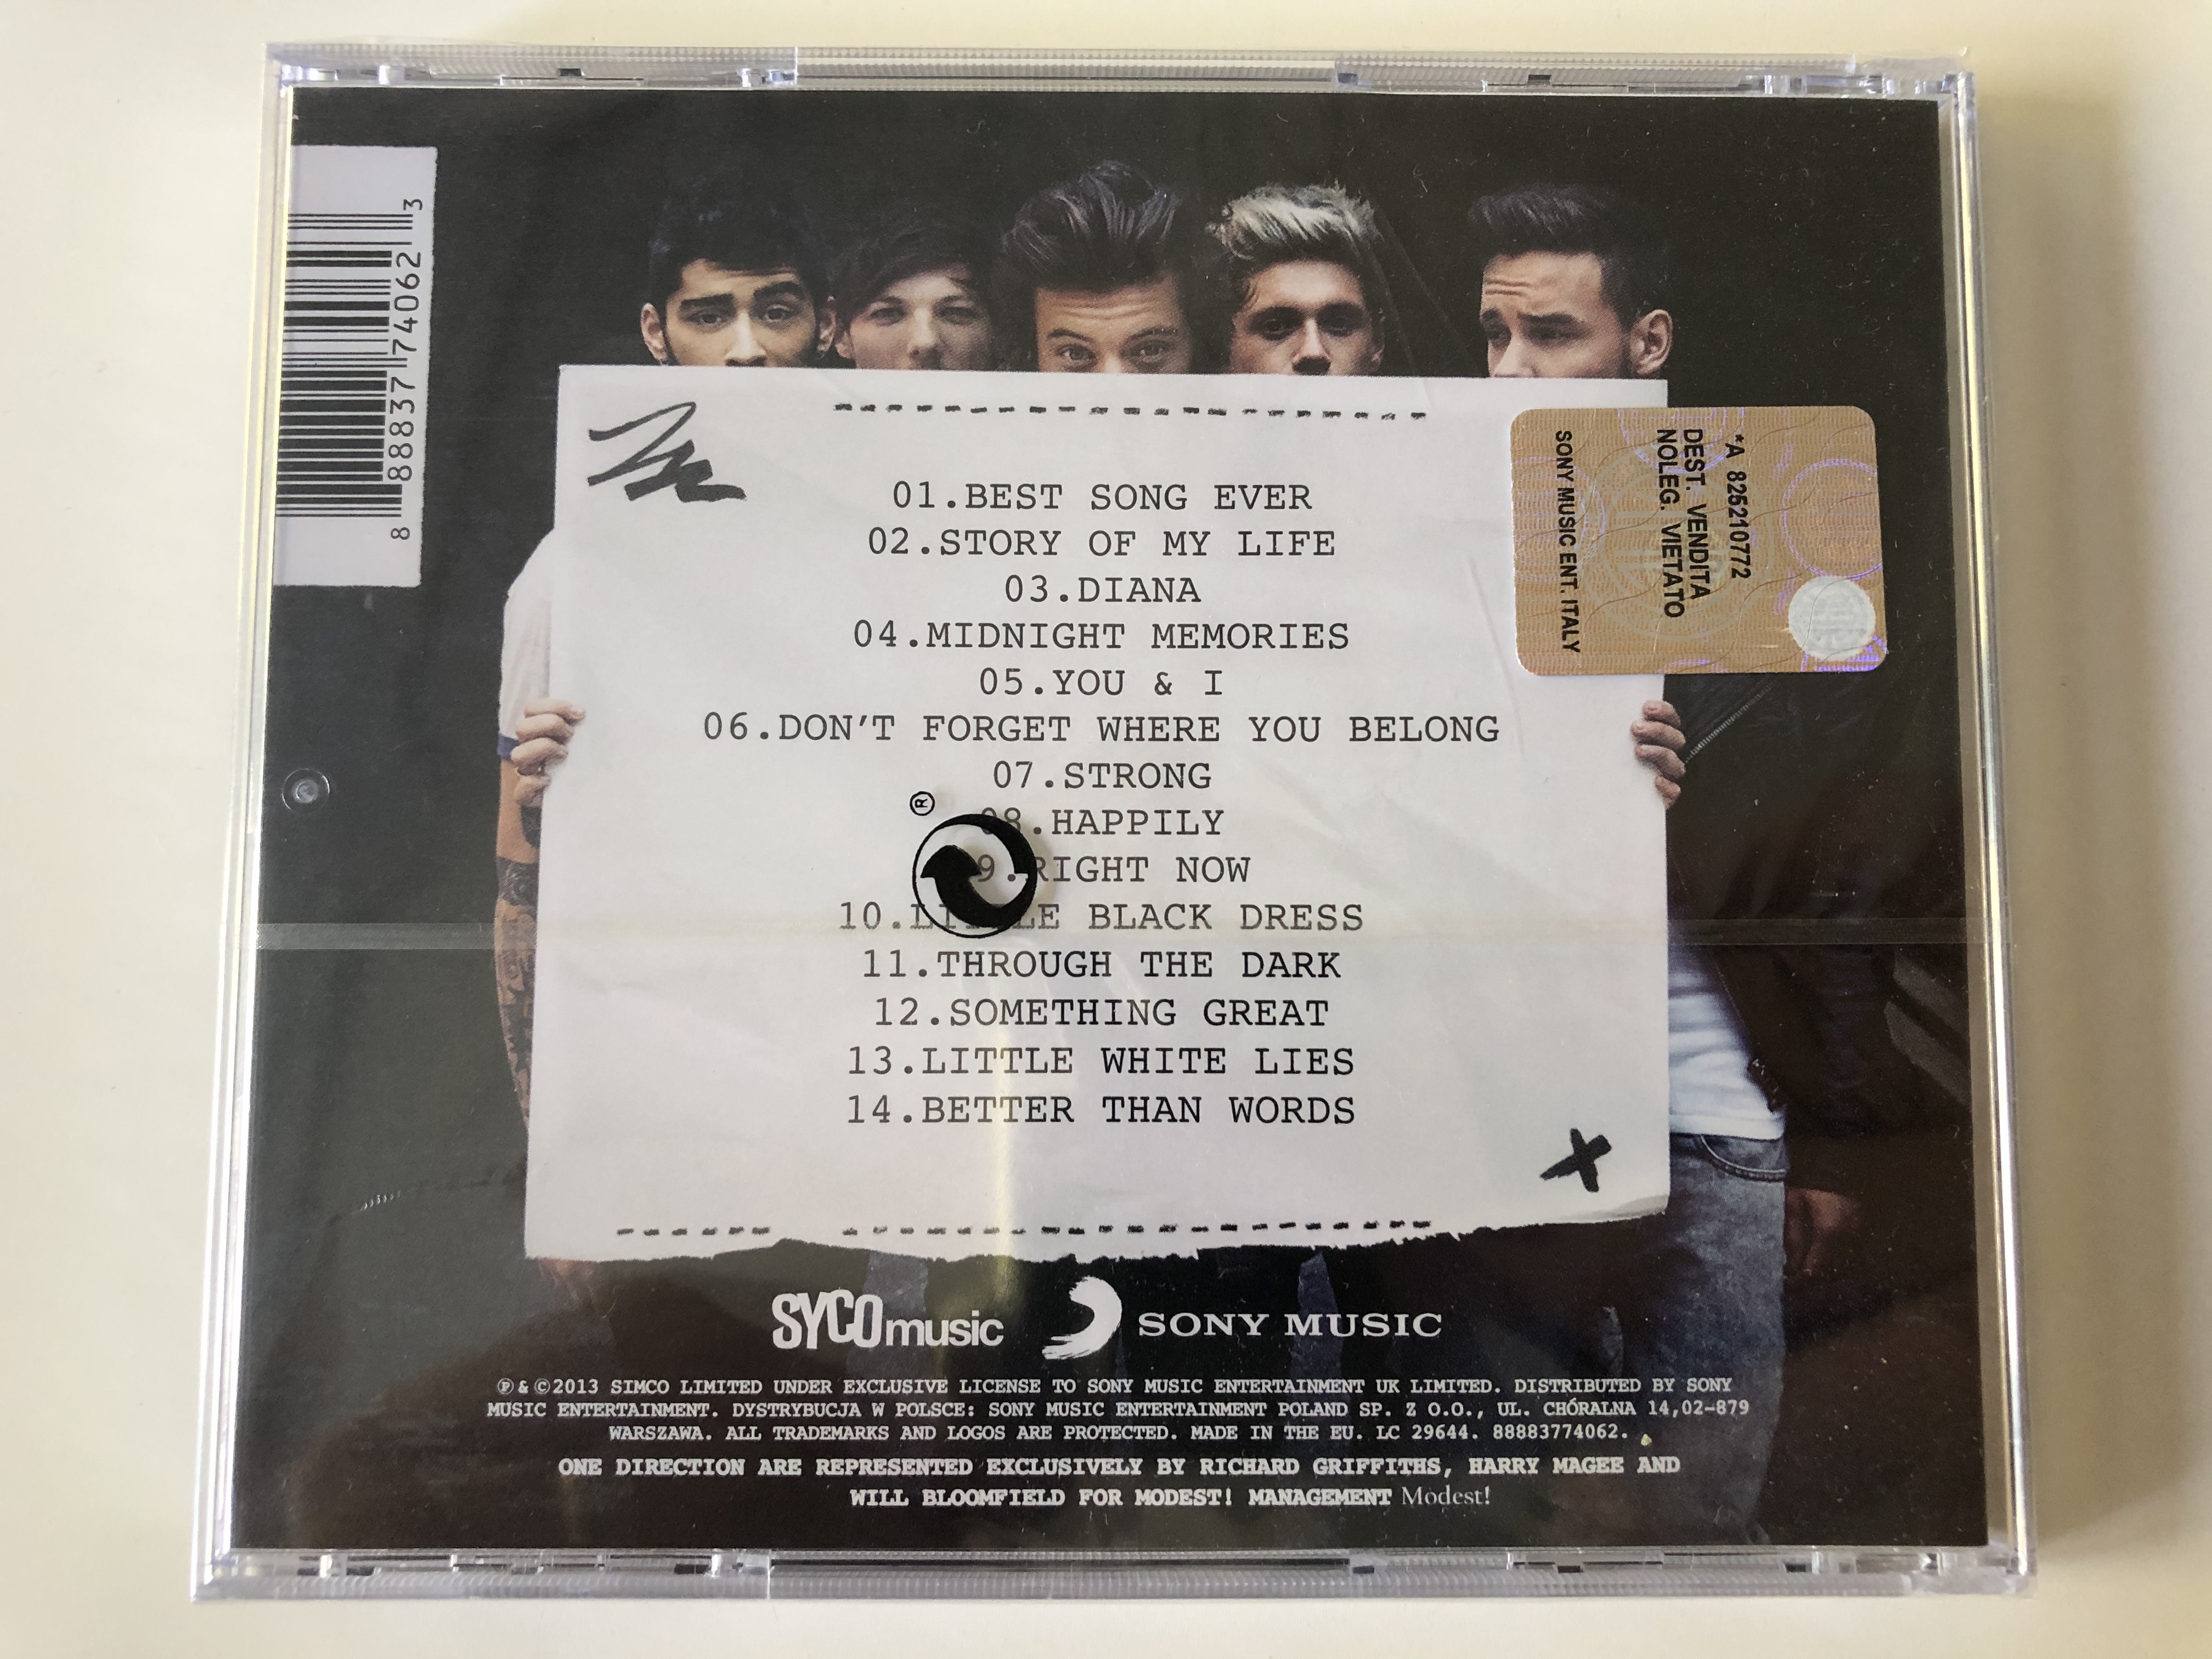 one-direction-midnight-memories-the-new-album-from-one-direction-includes-the-massive-hits-best-song-ever-story-of-my-life-sony-music-audio-cd-2013-88883774062-2-.jpg